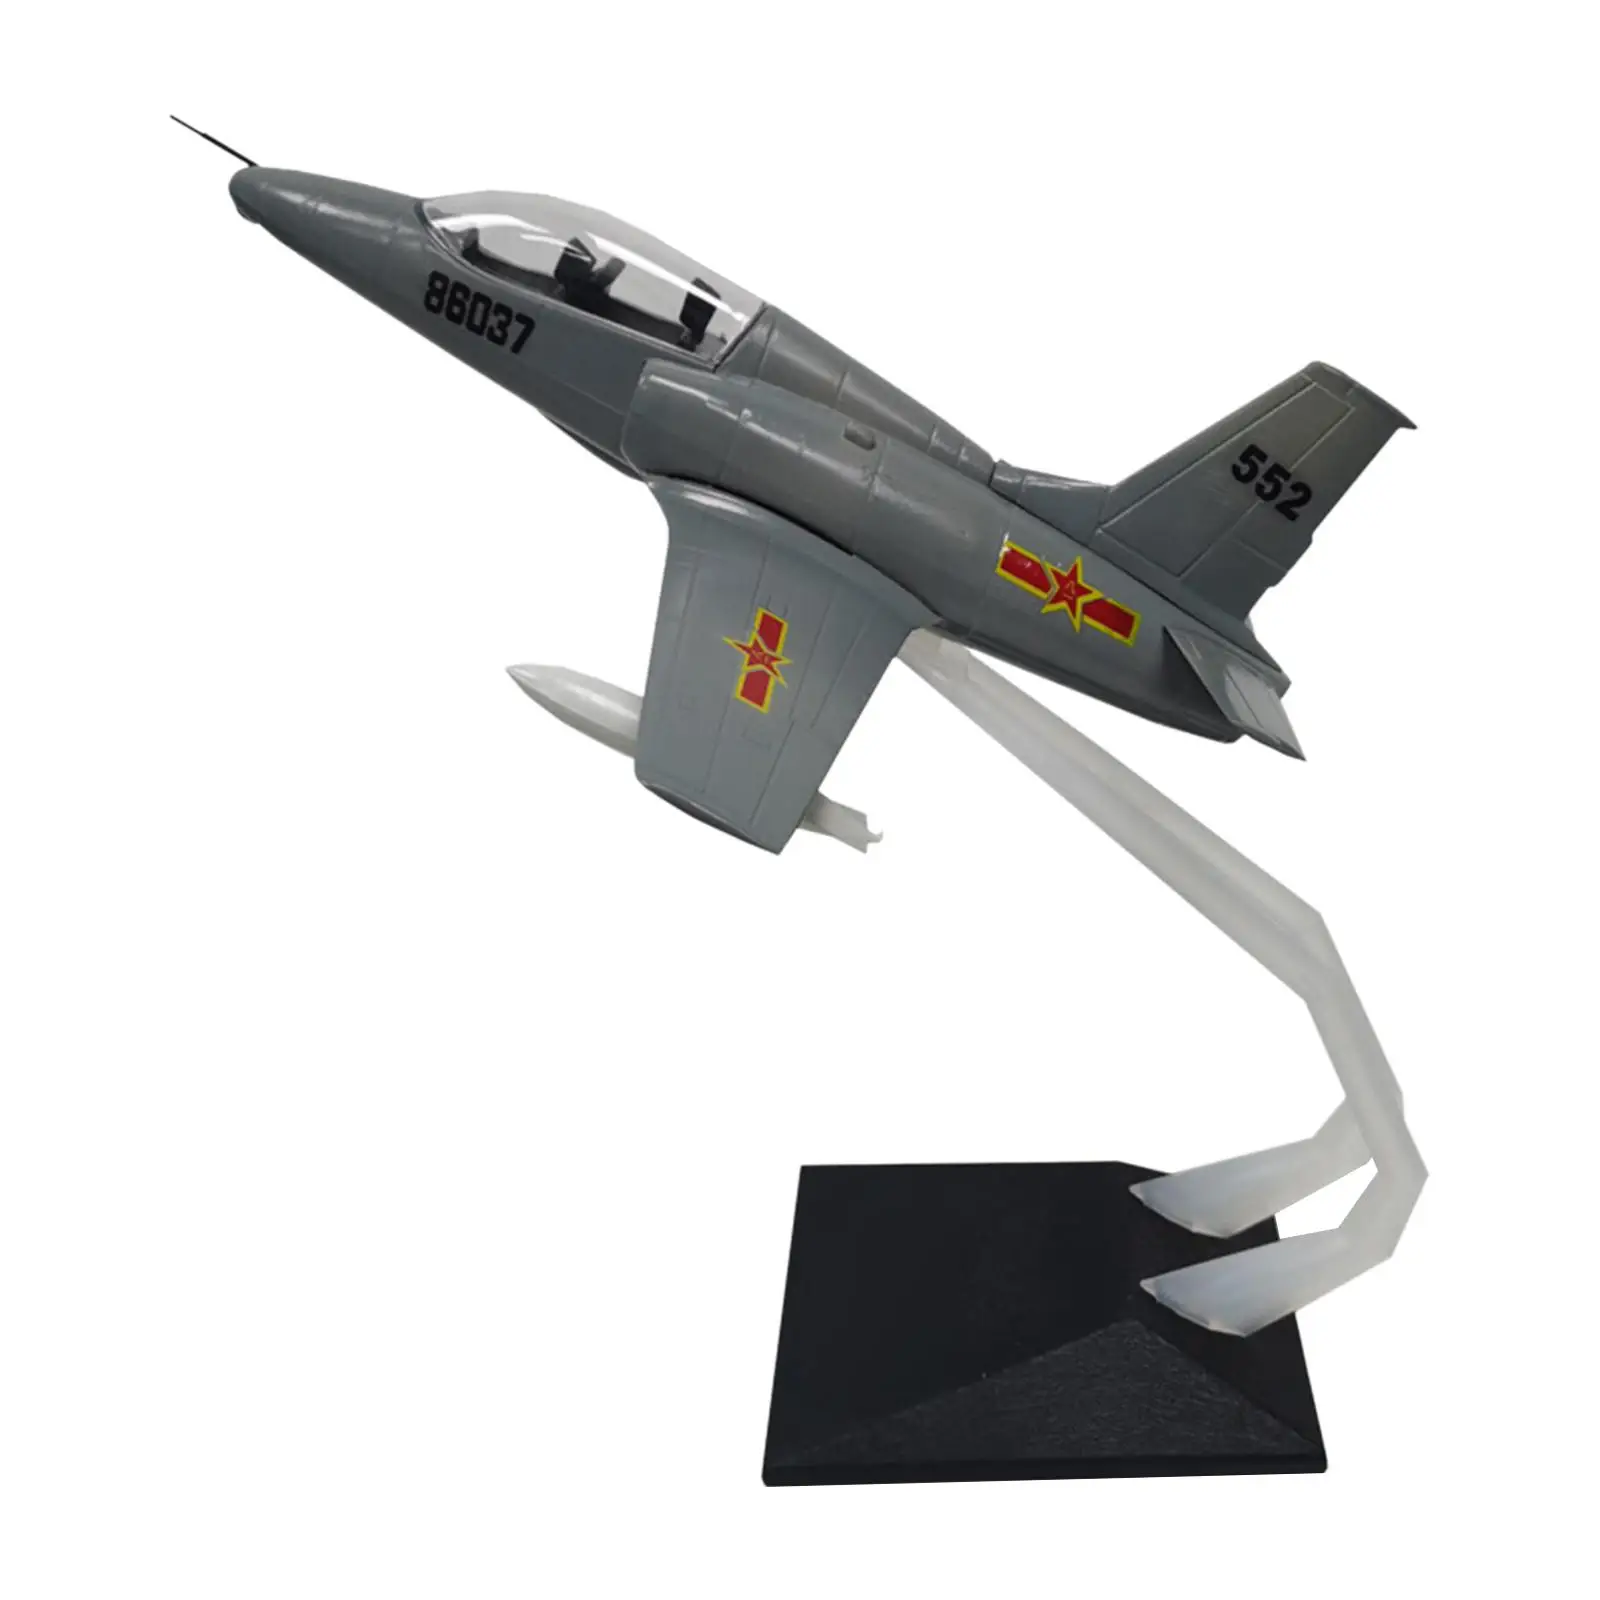 1:48 Scale Diecast Model Planes Souvenir Collection Airplane Model Fighter Jet Model for Bookshelf Cafe Office Home